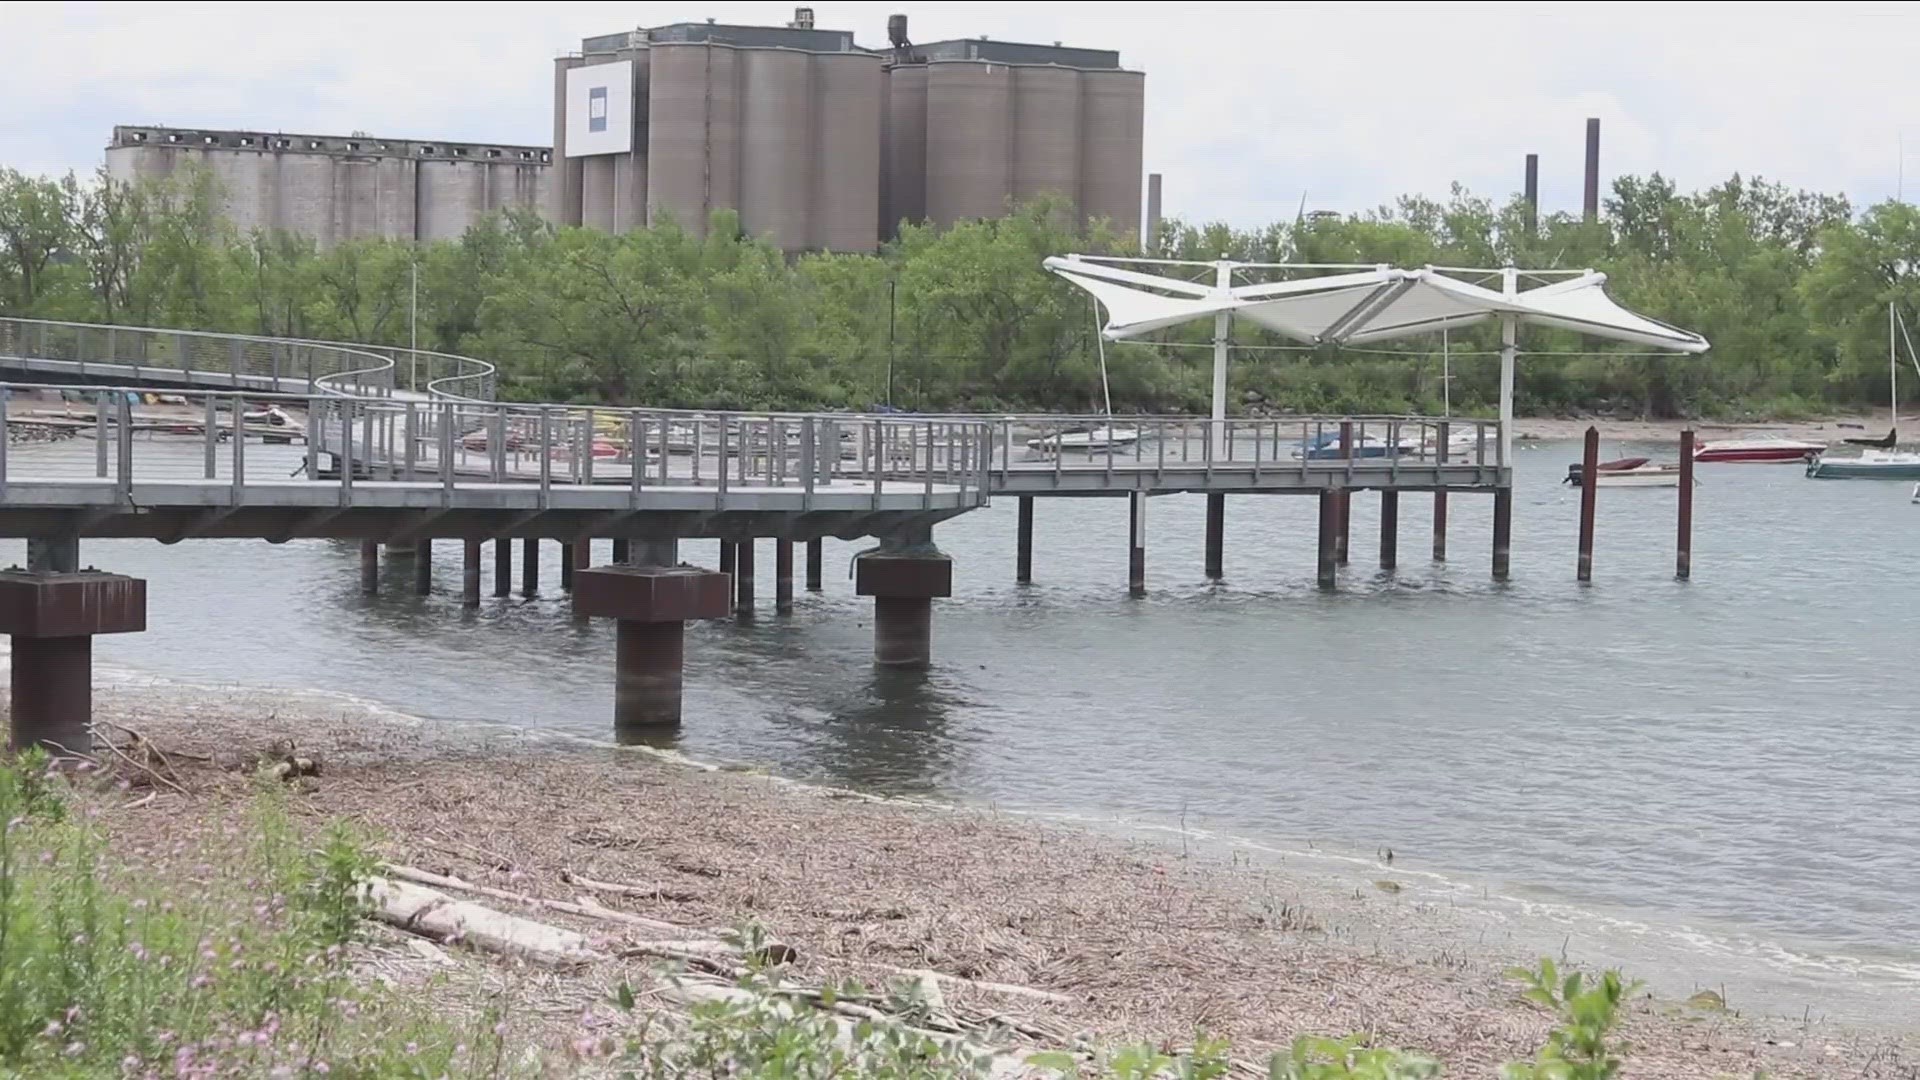 The Tifft Street Pier has been closed for 7 years but could reopen next week after repairs are finished.